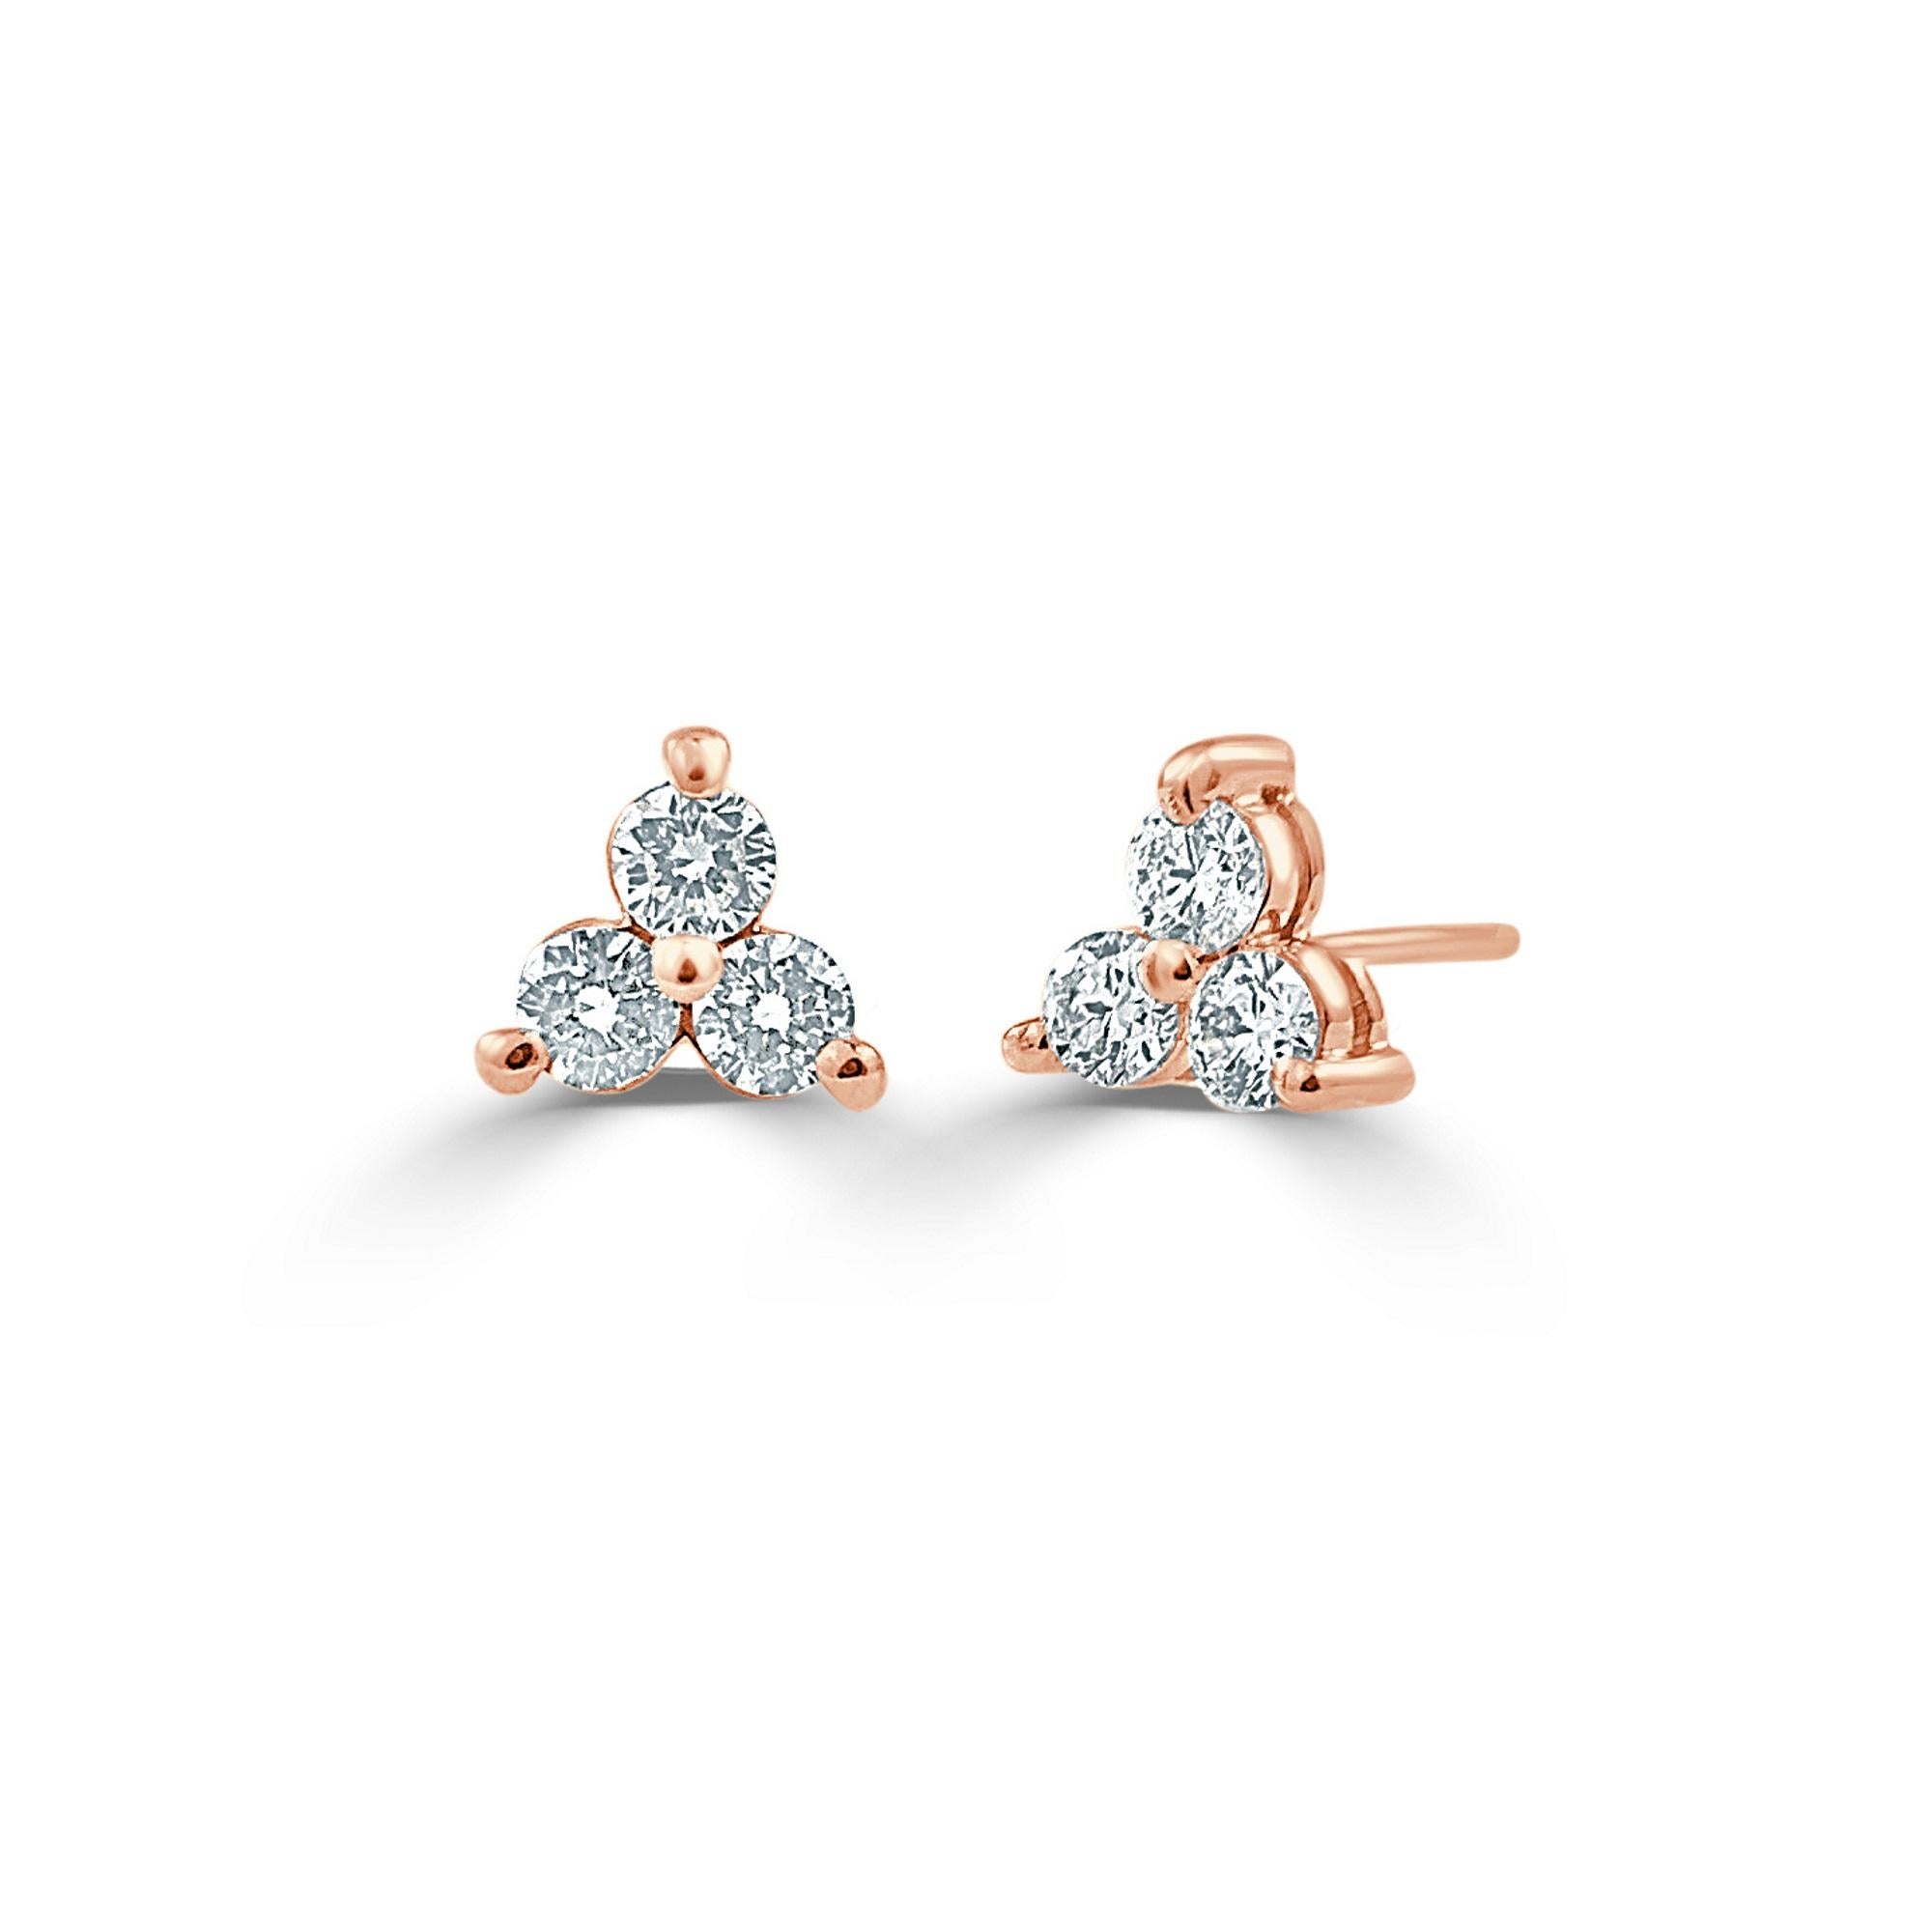 These Beautiful and Classic 3-Stone Diamond Cluster Stud Earrings are crafted of 14K Gold and feature 6 white round Diamonds weighing 0.51cts, has butterfly push-backs for closure. Diamond Color & Clarity is GH-SI1
-Diamond Weight: 0.51 ct.
-Diamond